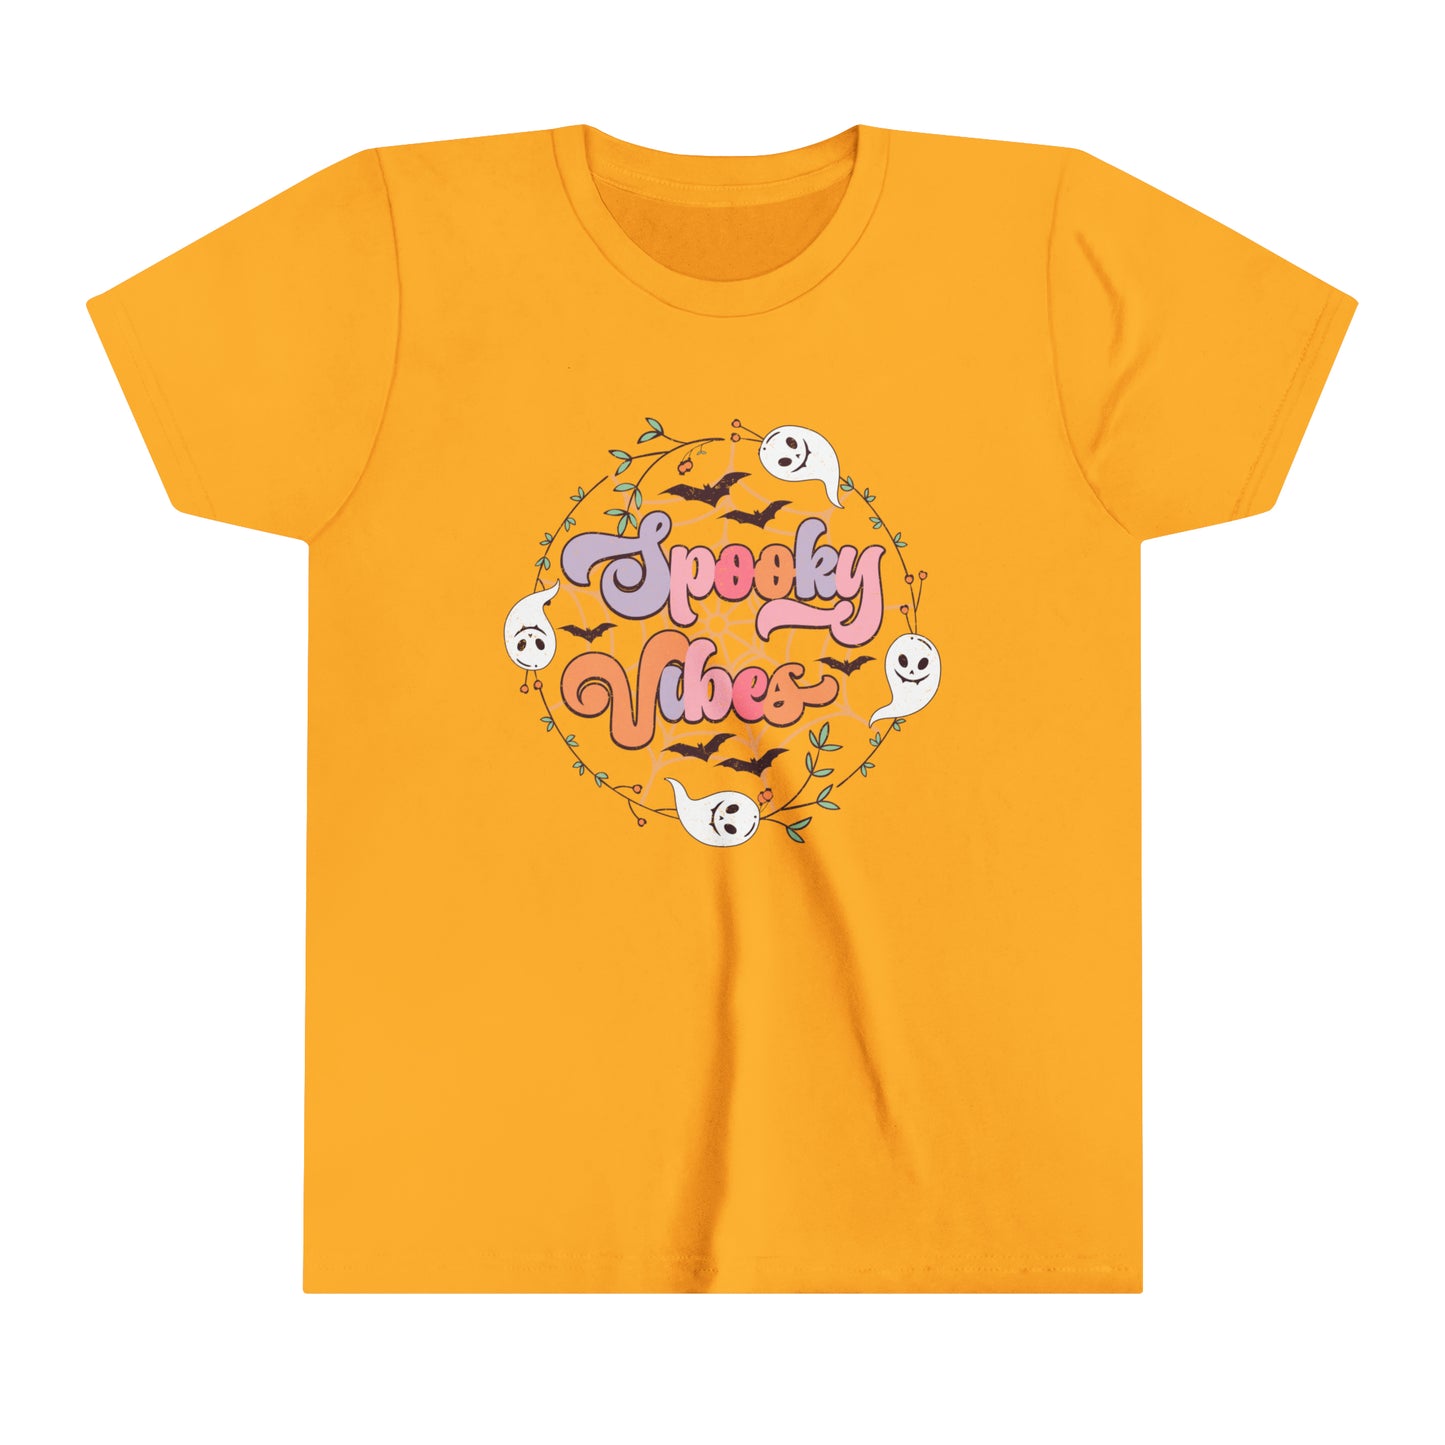 Spooky Vibes Circle Girl's Youth Short Sleeve Tee